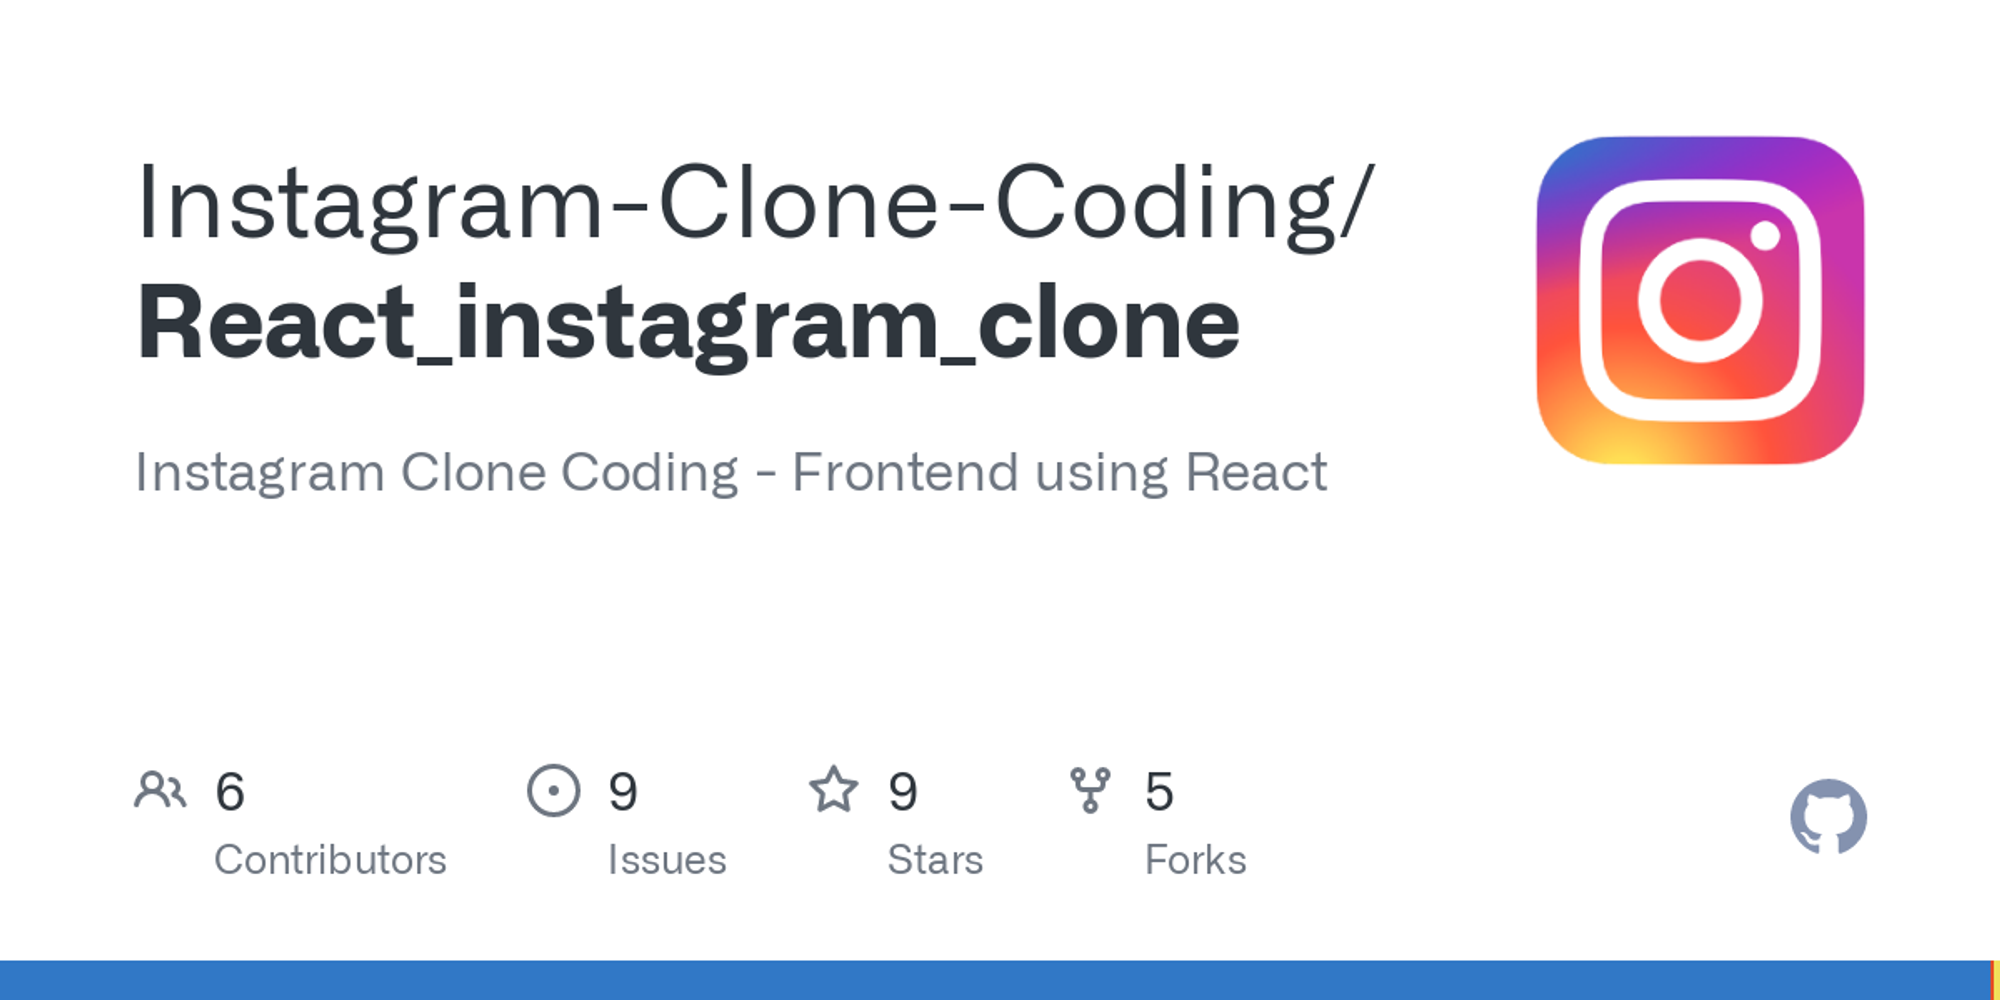 Clone Coding, Instagram Coding, Learn to Code, Practice Coding, Practice Coding